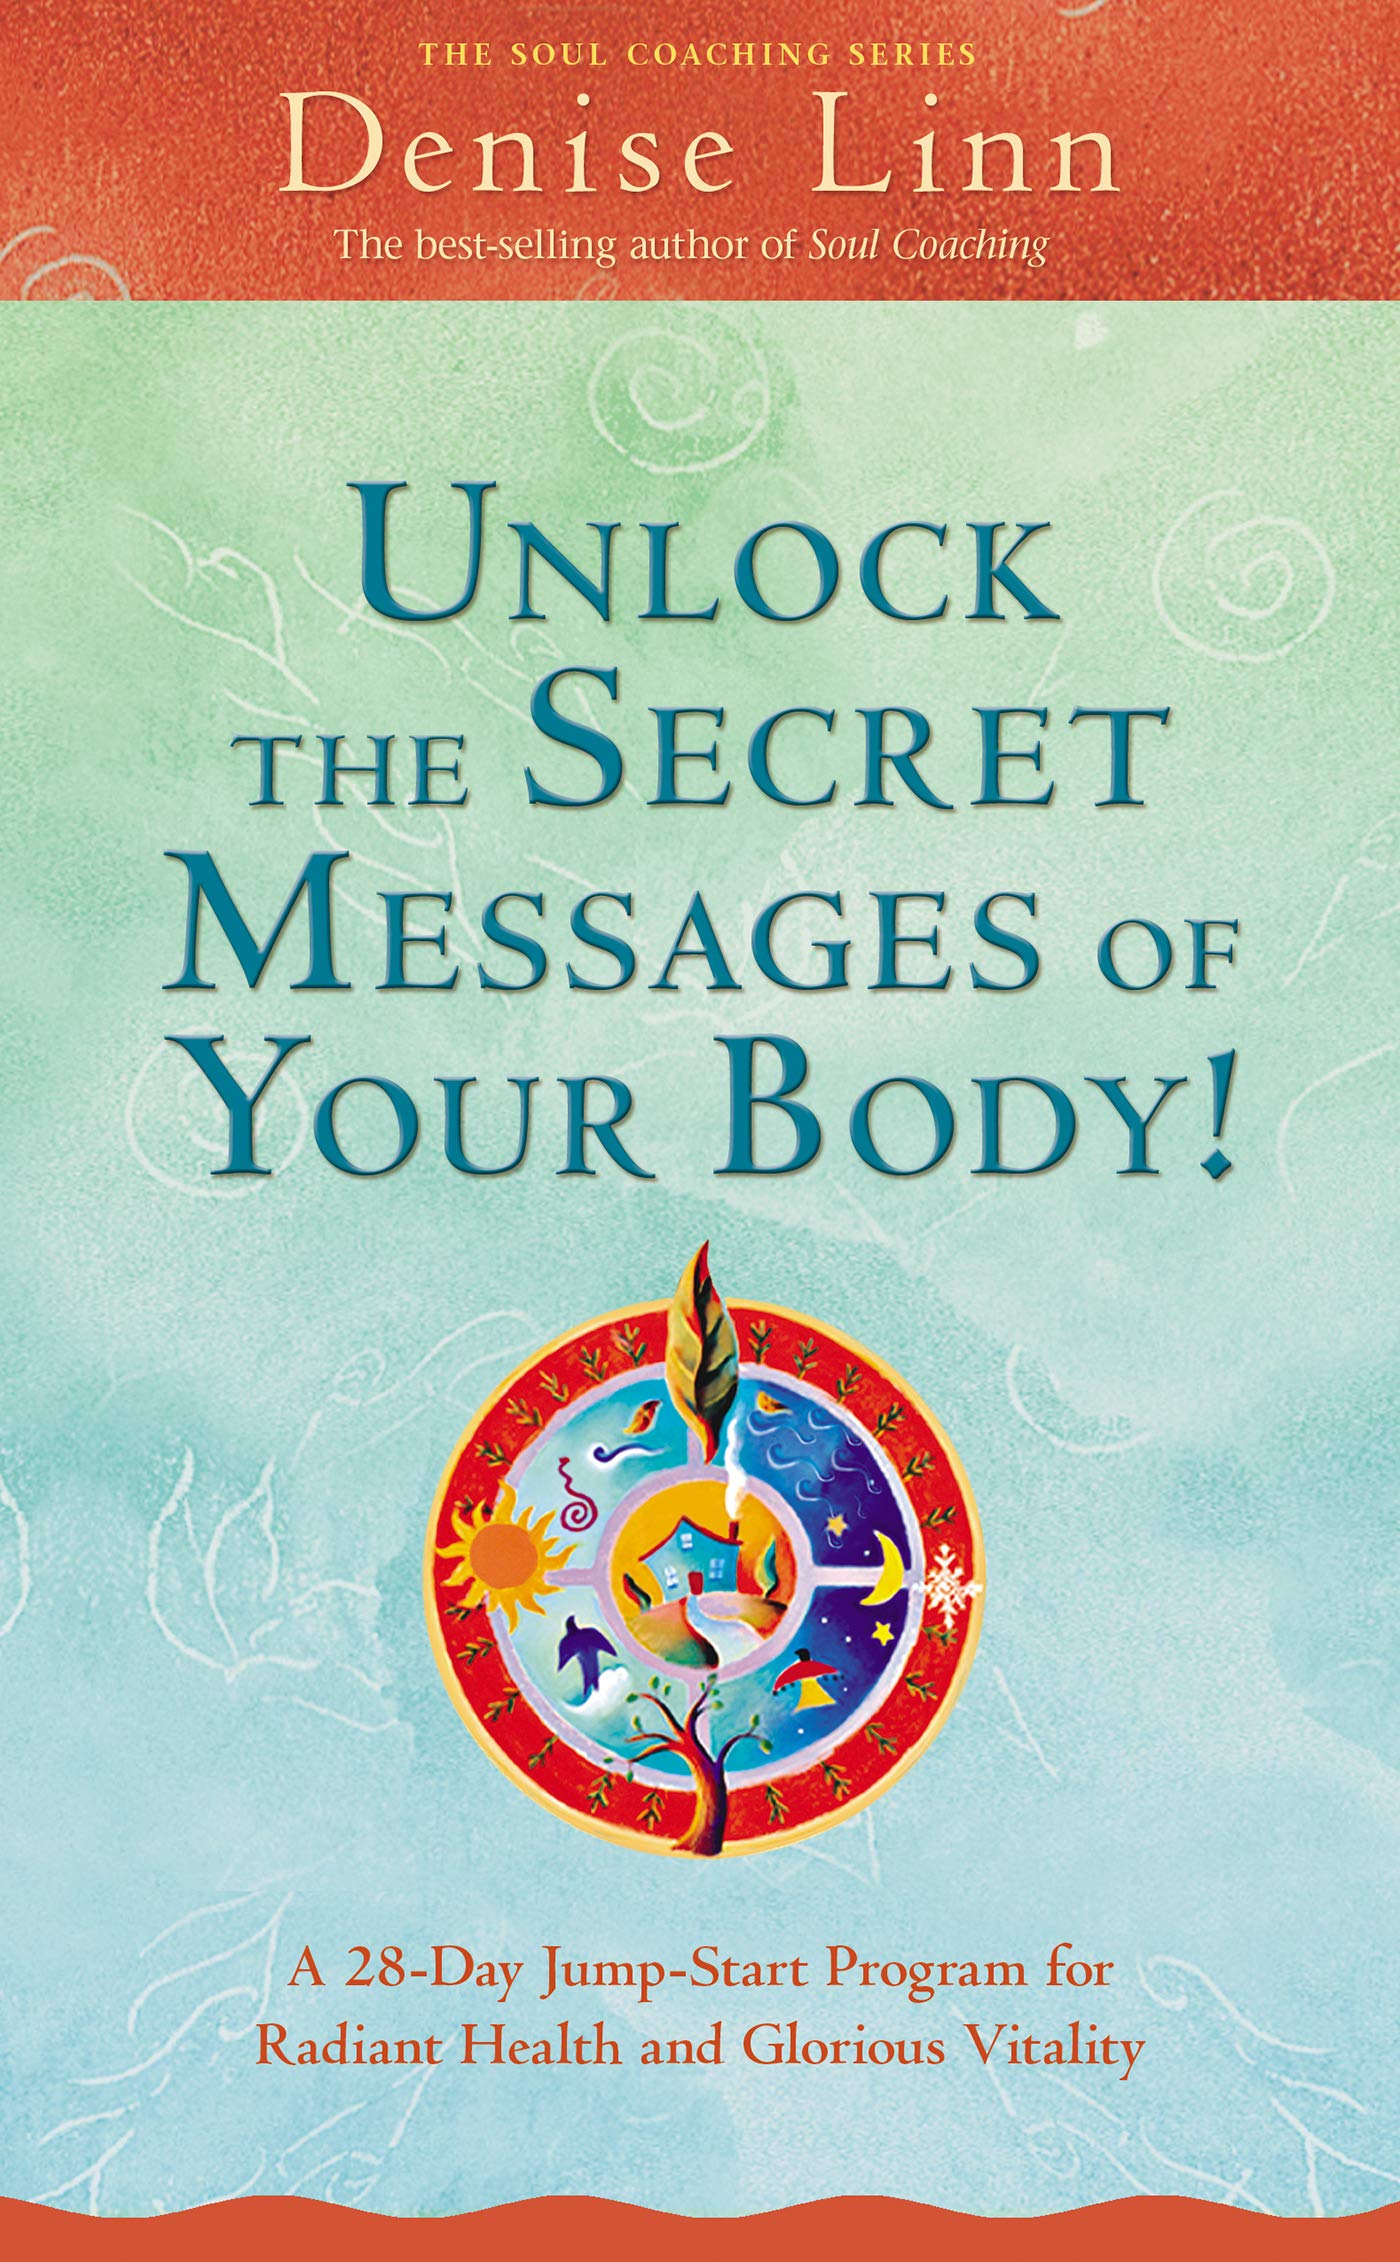 Unlock the Secret Messages of Your Body!: A 28-Day Jump-Start Program For Radiant Health And Glorious Vitality (Soul Coaching)